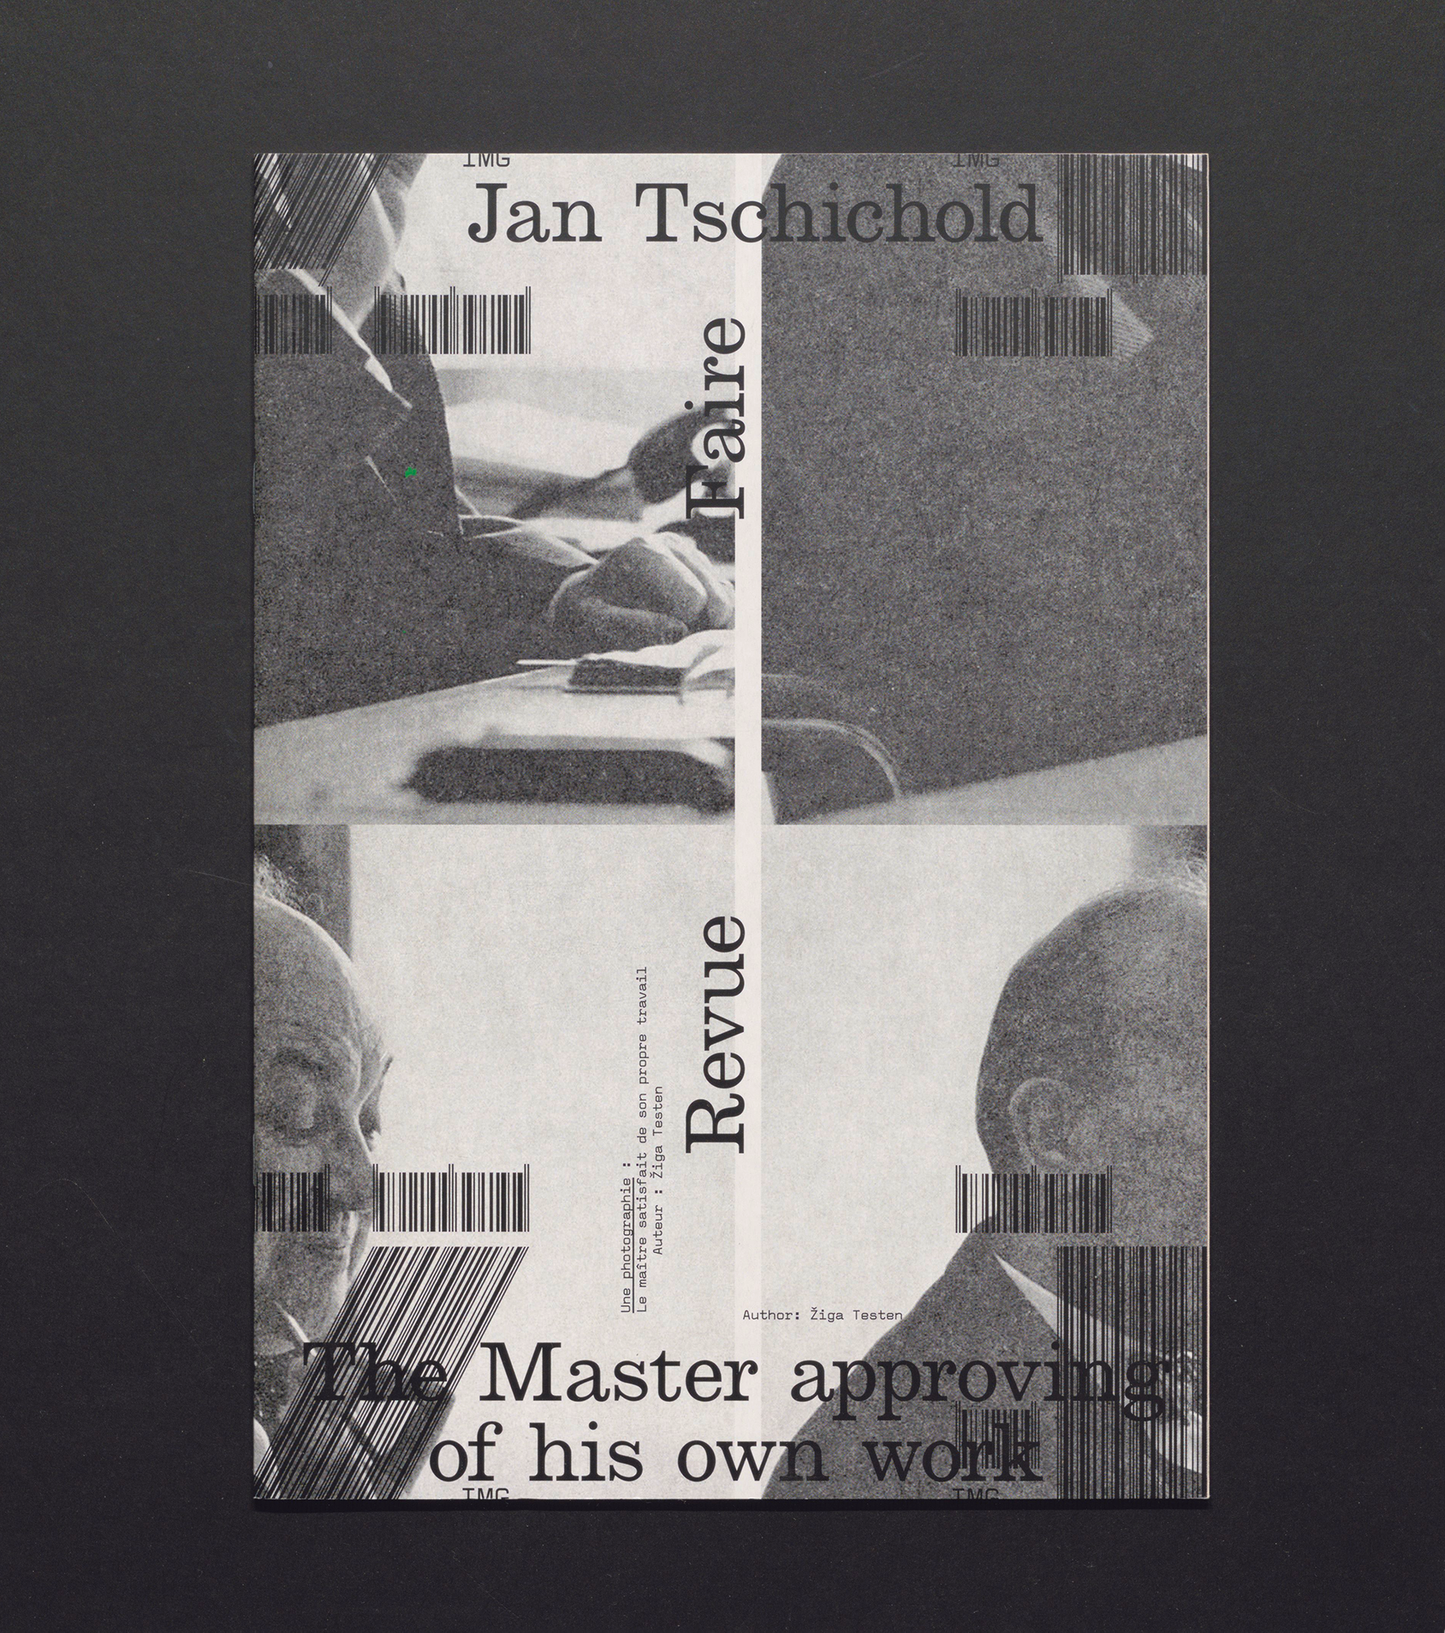 Revue Faire No. 23 - Jan Tschichold: The Master approving of his own work